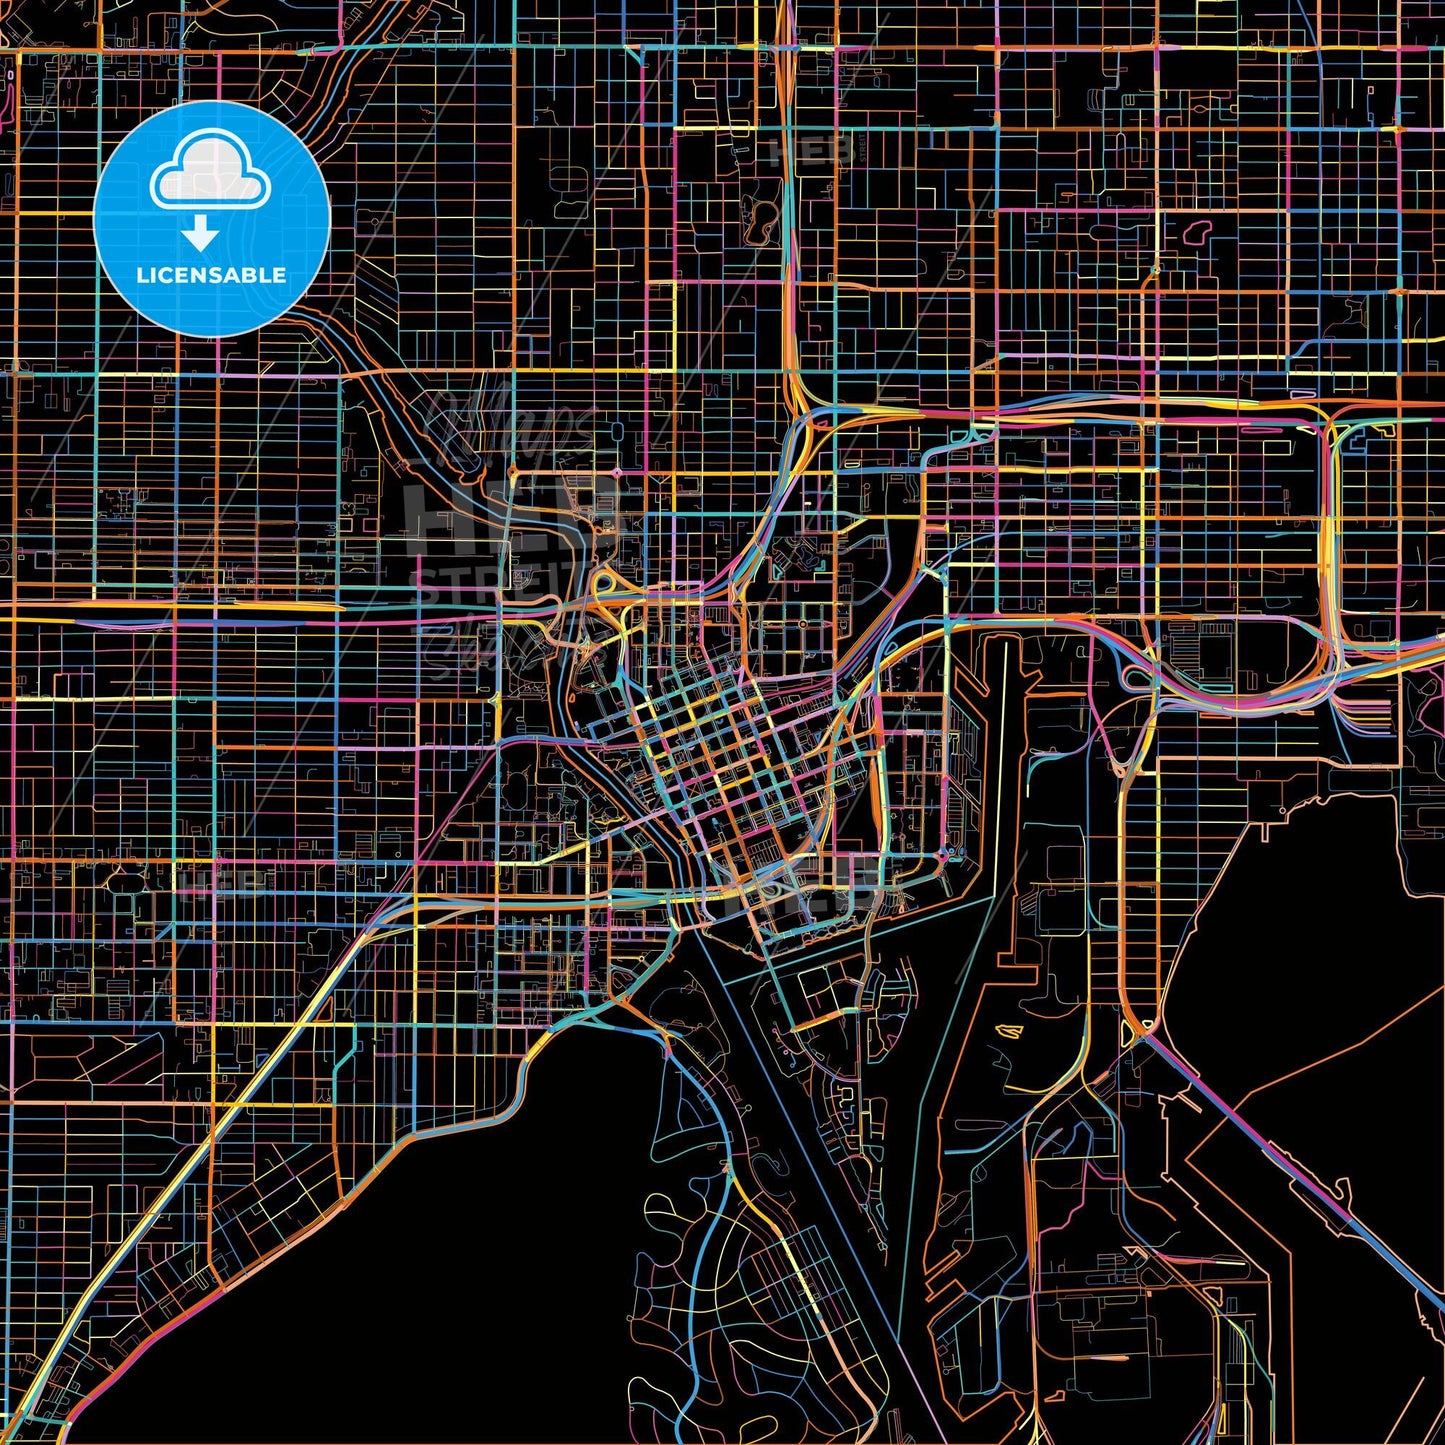 Tampa, Florida, United States, colorful city map on black background